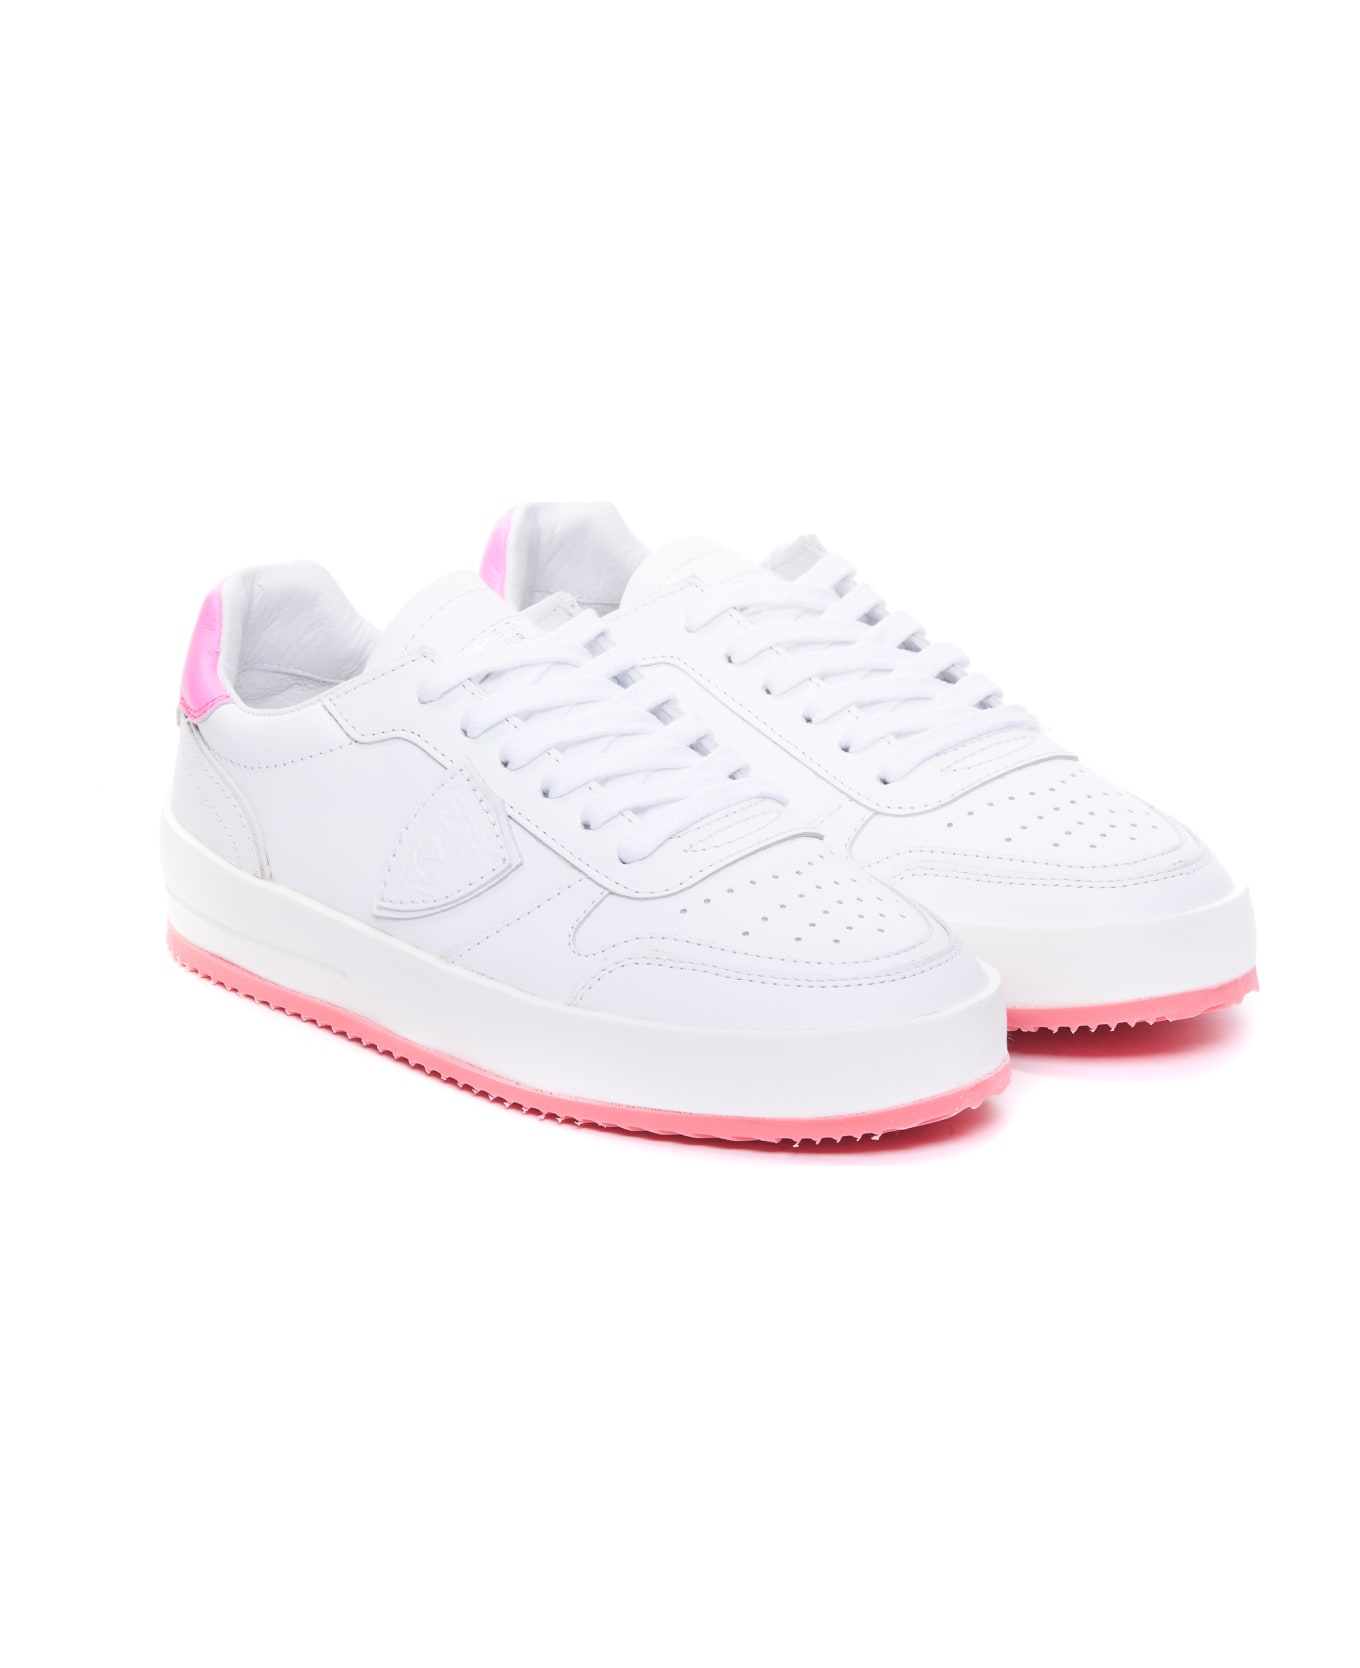 Philippe Model Nice Low Sneakers - Veau Neon Blanc Fucsia